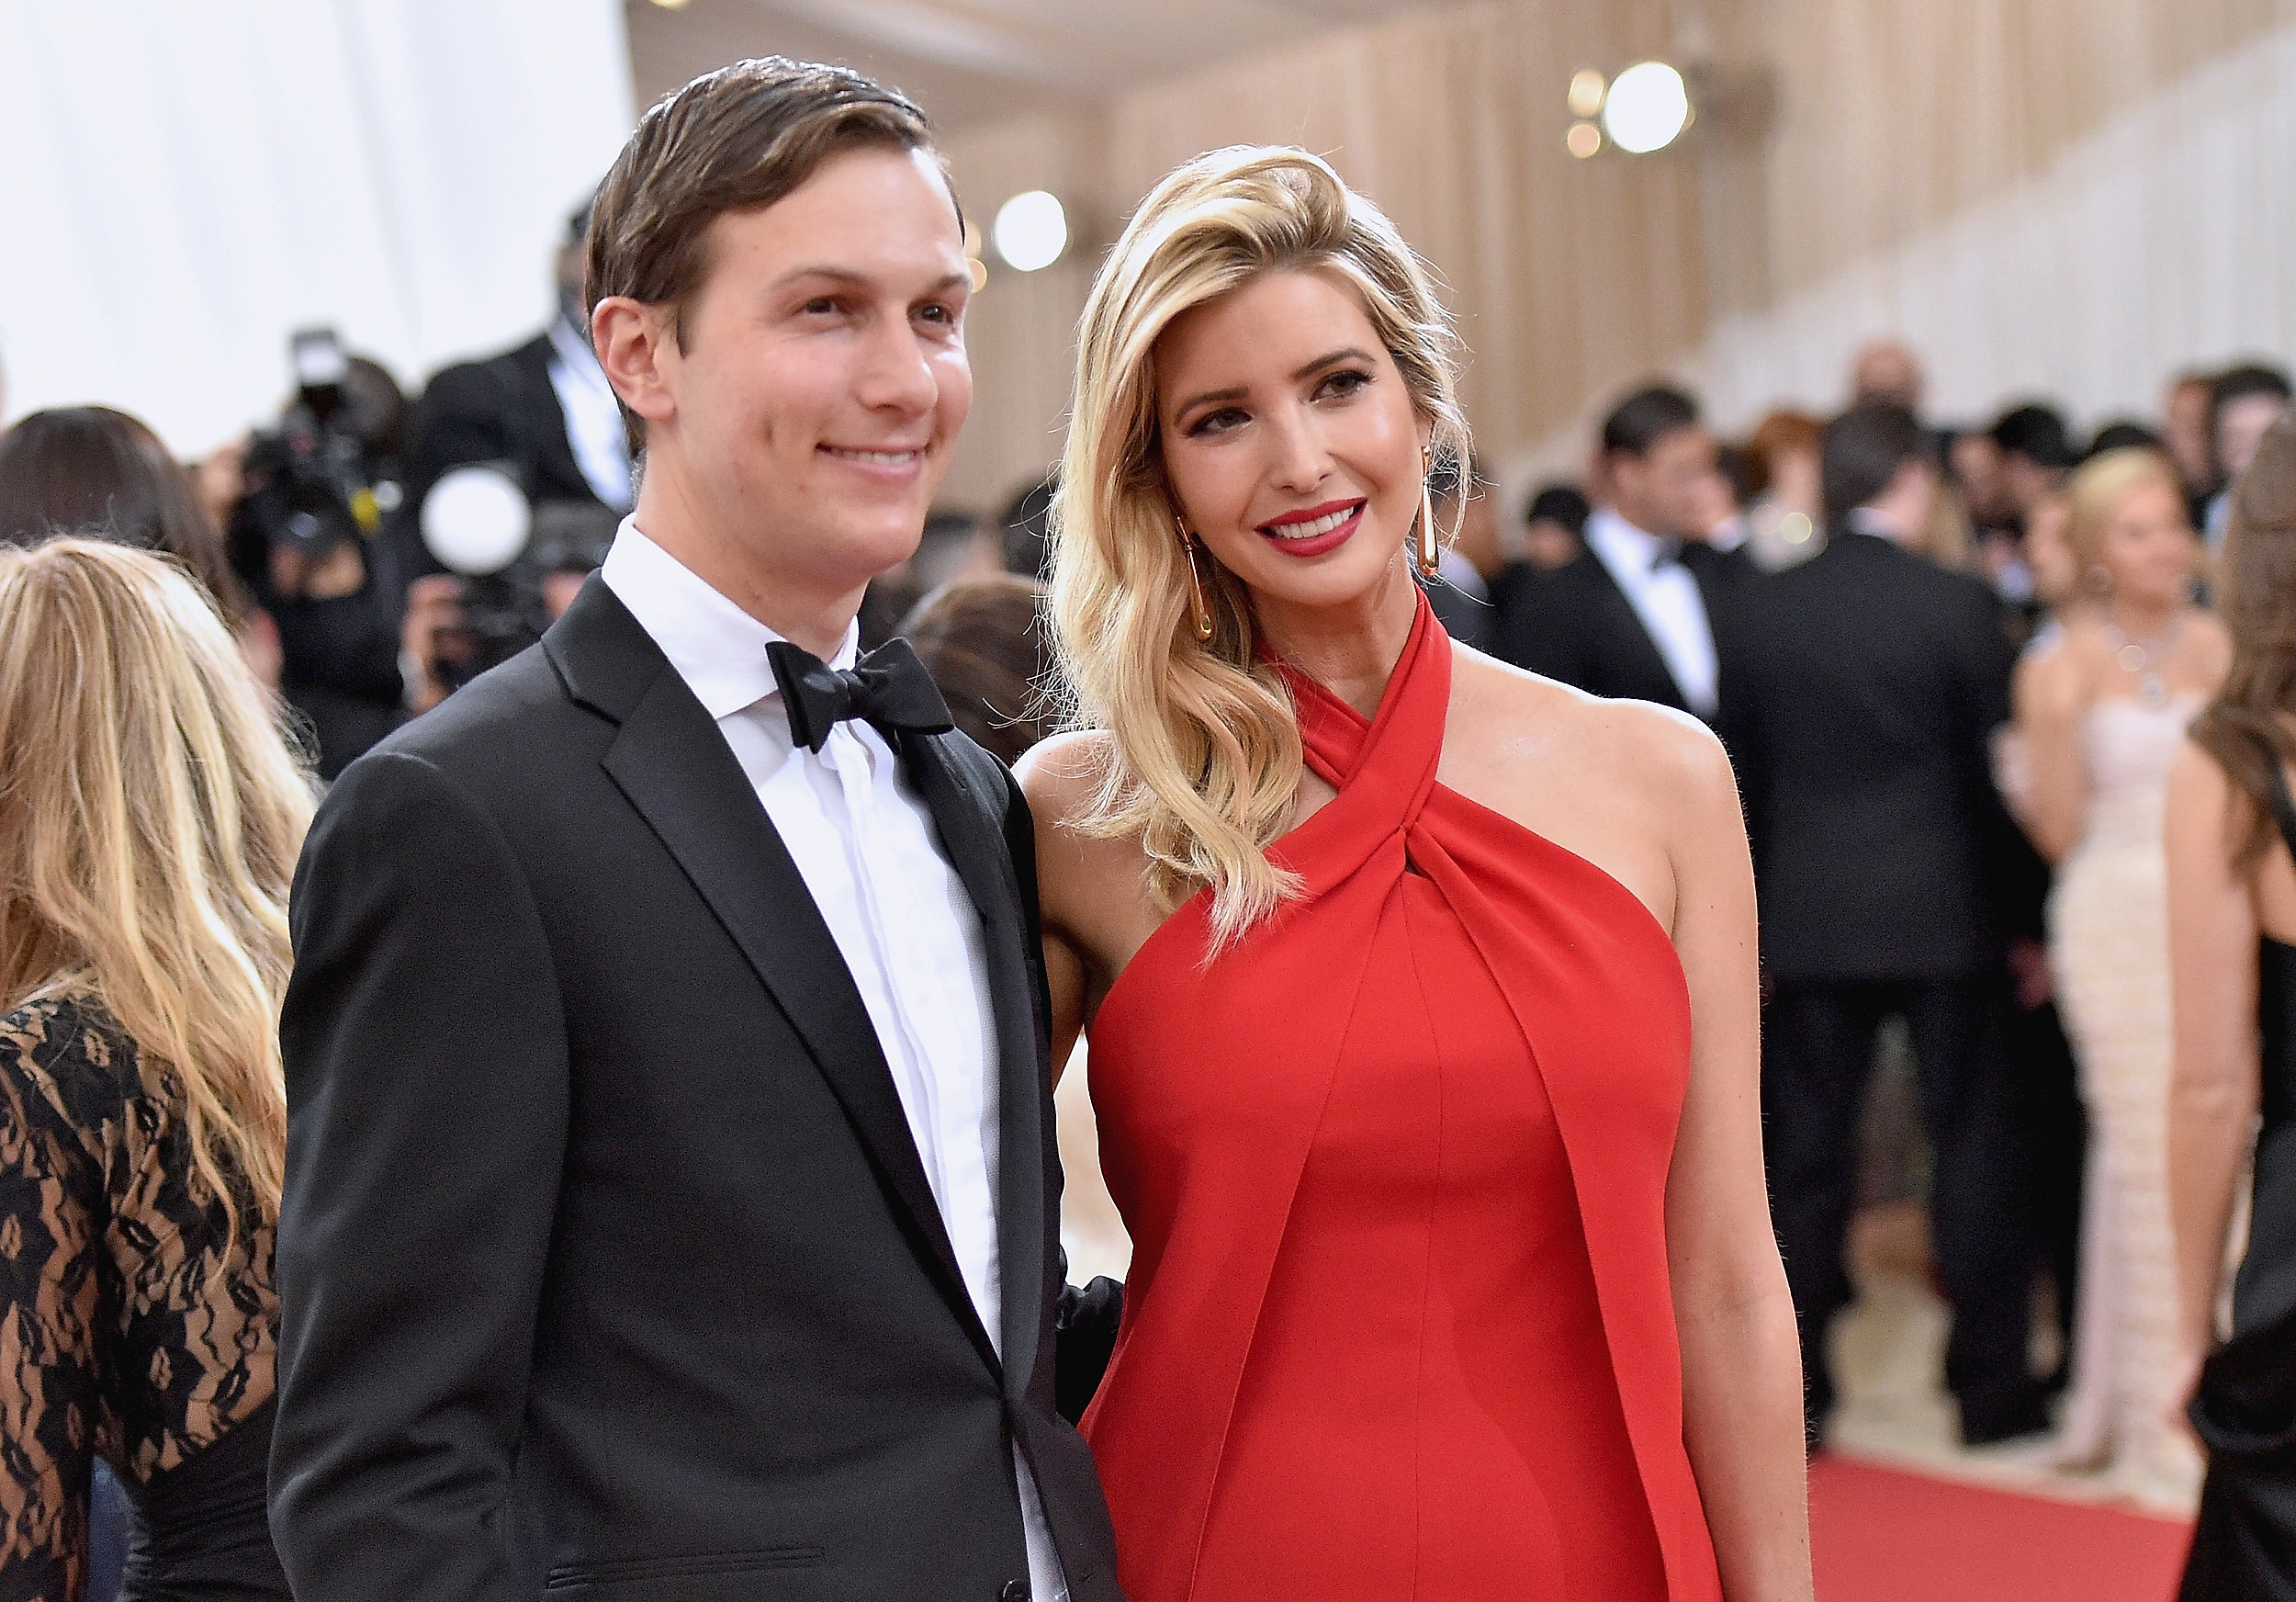 NEW YORK, NY - MAY 02: Jared Kushner and wife  Ivanka Trump attend the "Manus x Machina: Fashion In An Age Of Technology" Costume Institute Gala at Metropolitan Museum of Art on May 2, 2016 in New York City.  (Photo by Mike Coppola/Getty Images for People.com) (Mike Coppola—Getty Images for People.com)